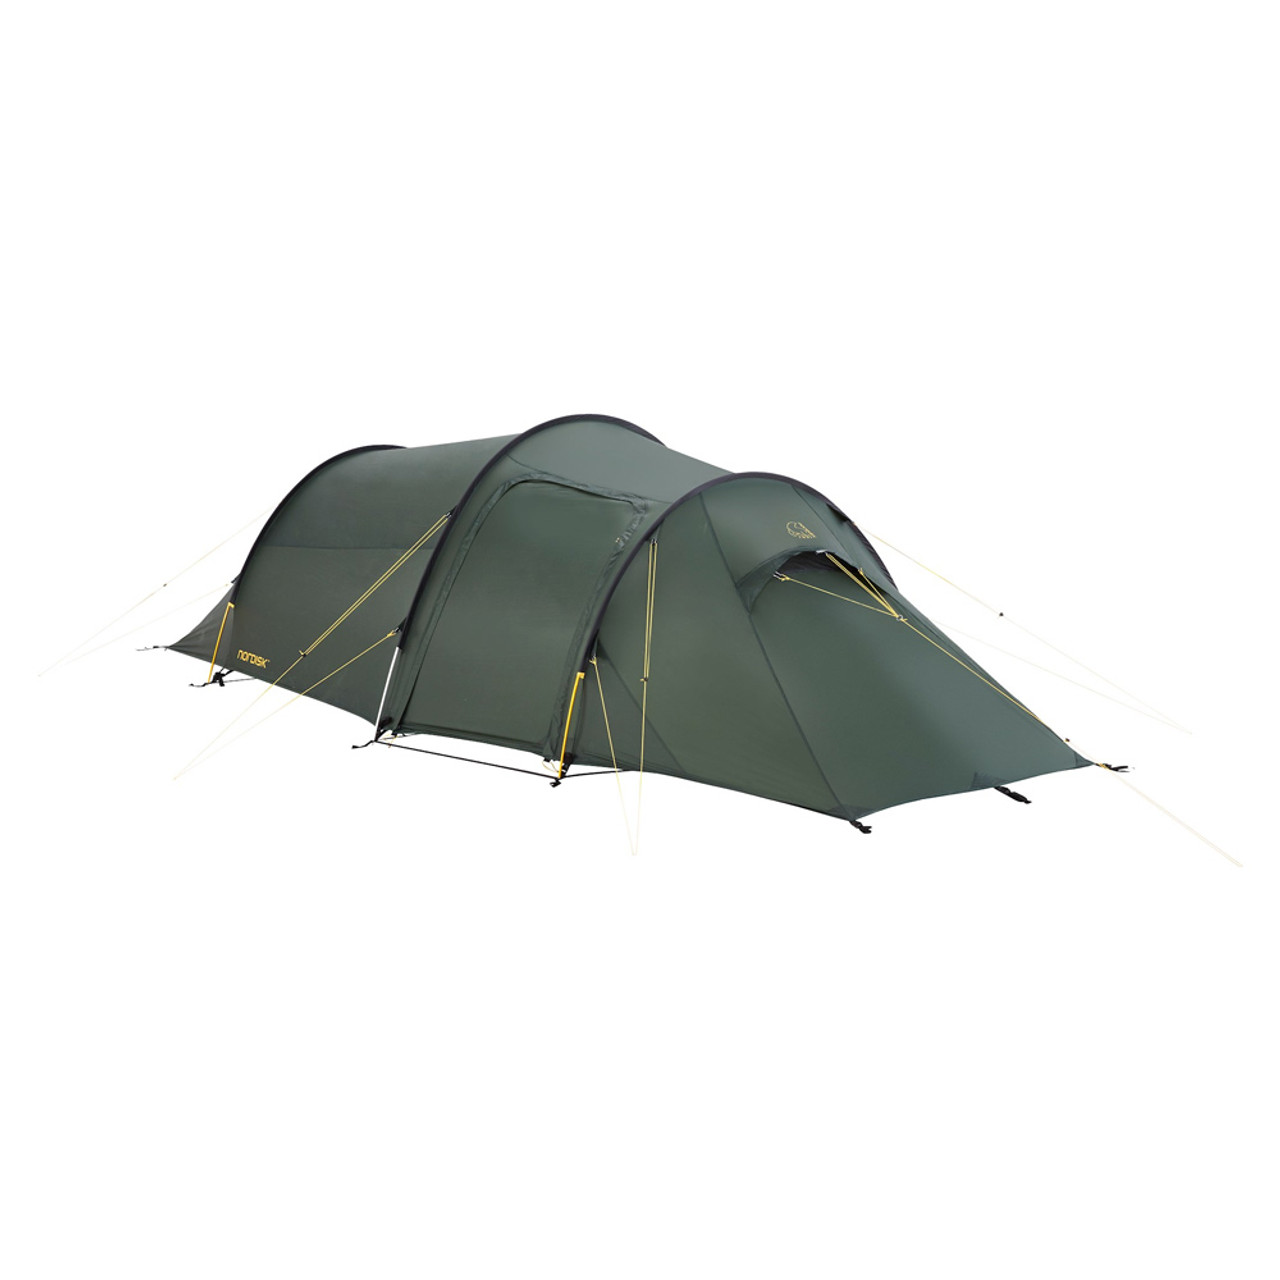 Oppland 2 SI Tent